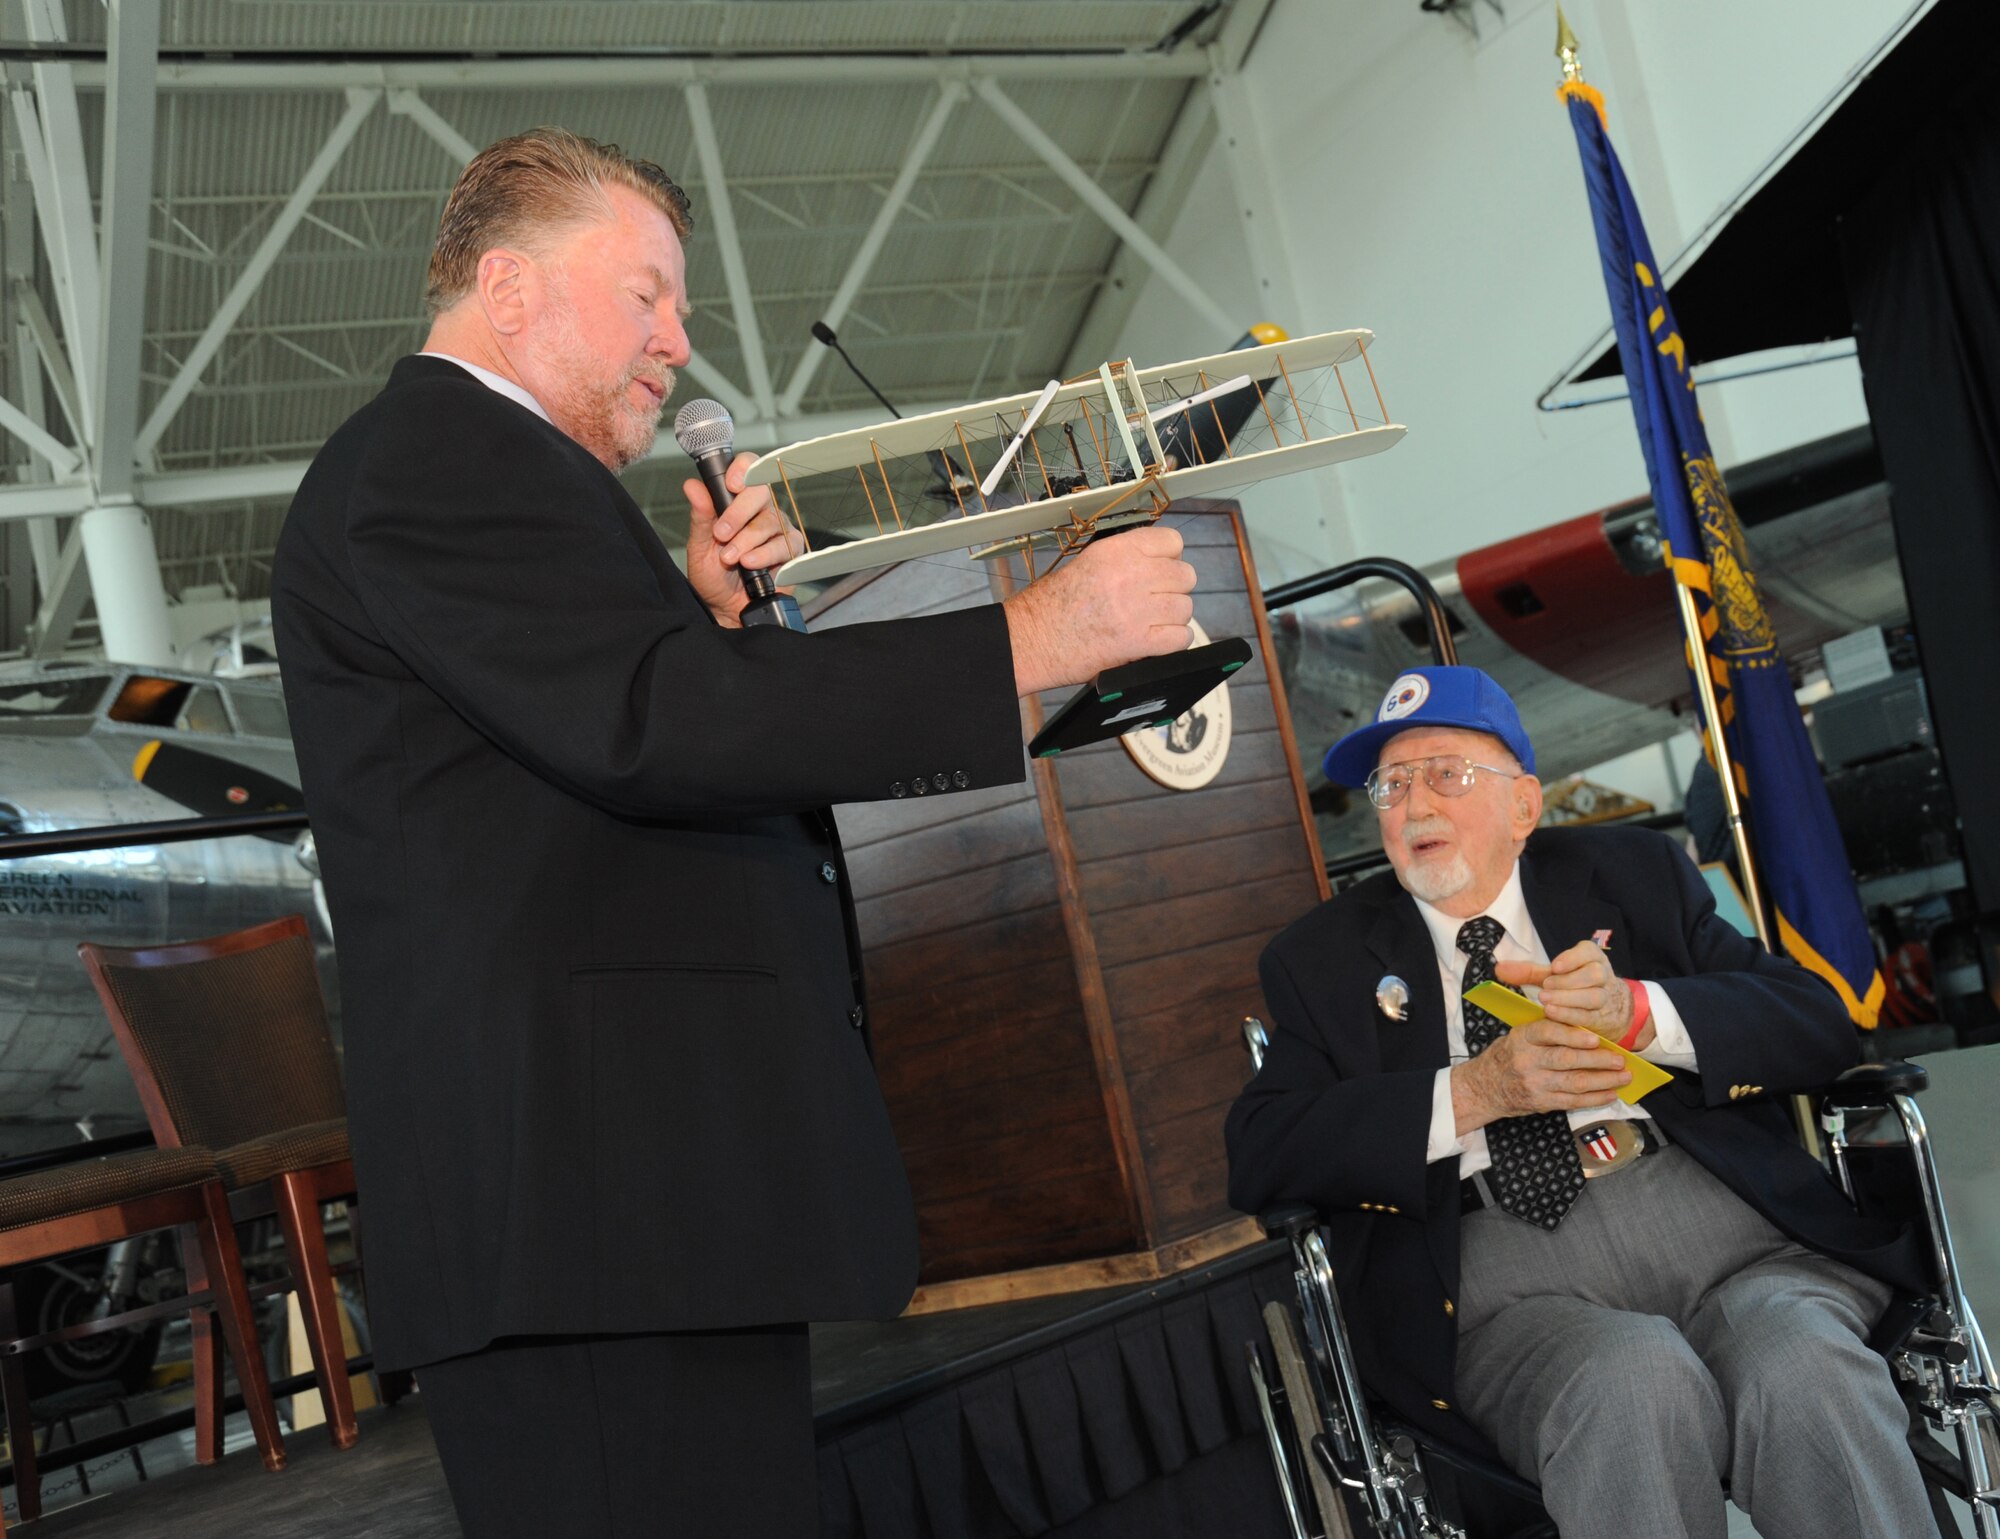 Mike Burrell, the Chairman of the selection committee for the Evergreen Aviation and Space Museum, presents the "Wright Flyer" award to Fred Parish during the  Oregon Aviation Hall of Honor Ceremony held at the Evergreen Aviation and Space Museum, McMinnville, Ore., on October 17, 2010. Parish was representing the 123rd Observation Squardron, which was the first group to be inducted into the Hall of Honor. He is one of only eight living original members still living from the group of 117 members of the 123rd Oregon National Guard's first aviation unit. (U.S. Air Force photograph by Staff Sgt. John Hughel, 142nd Fighter Wing Public Affairs Department) 